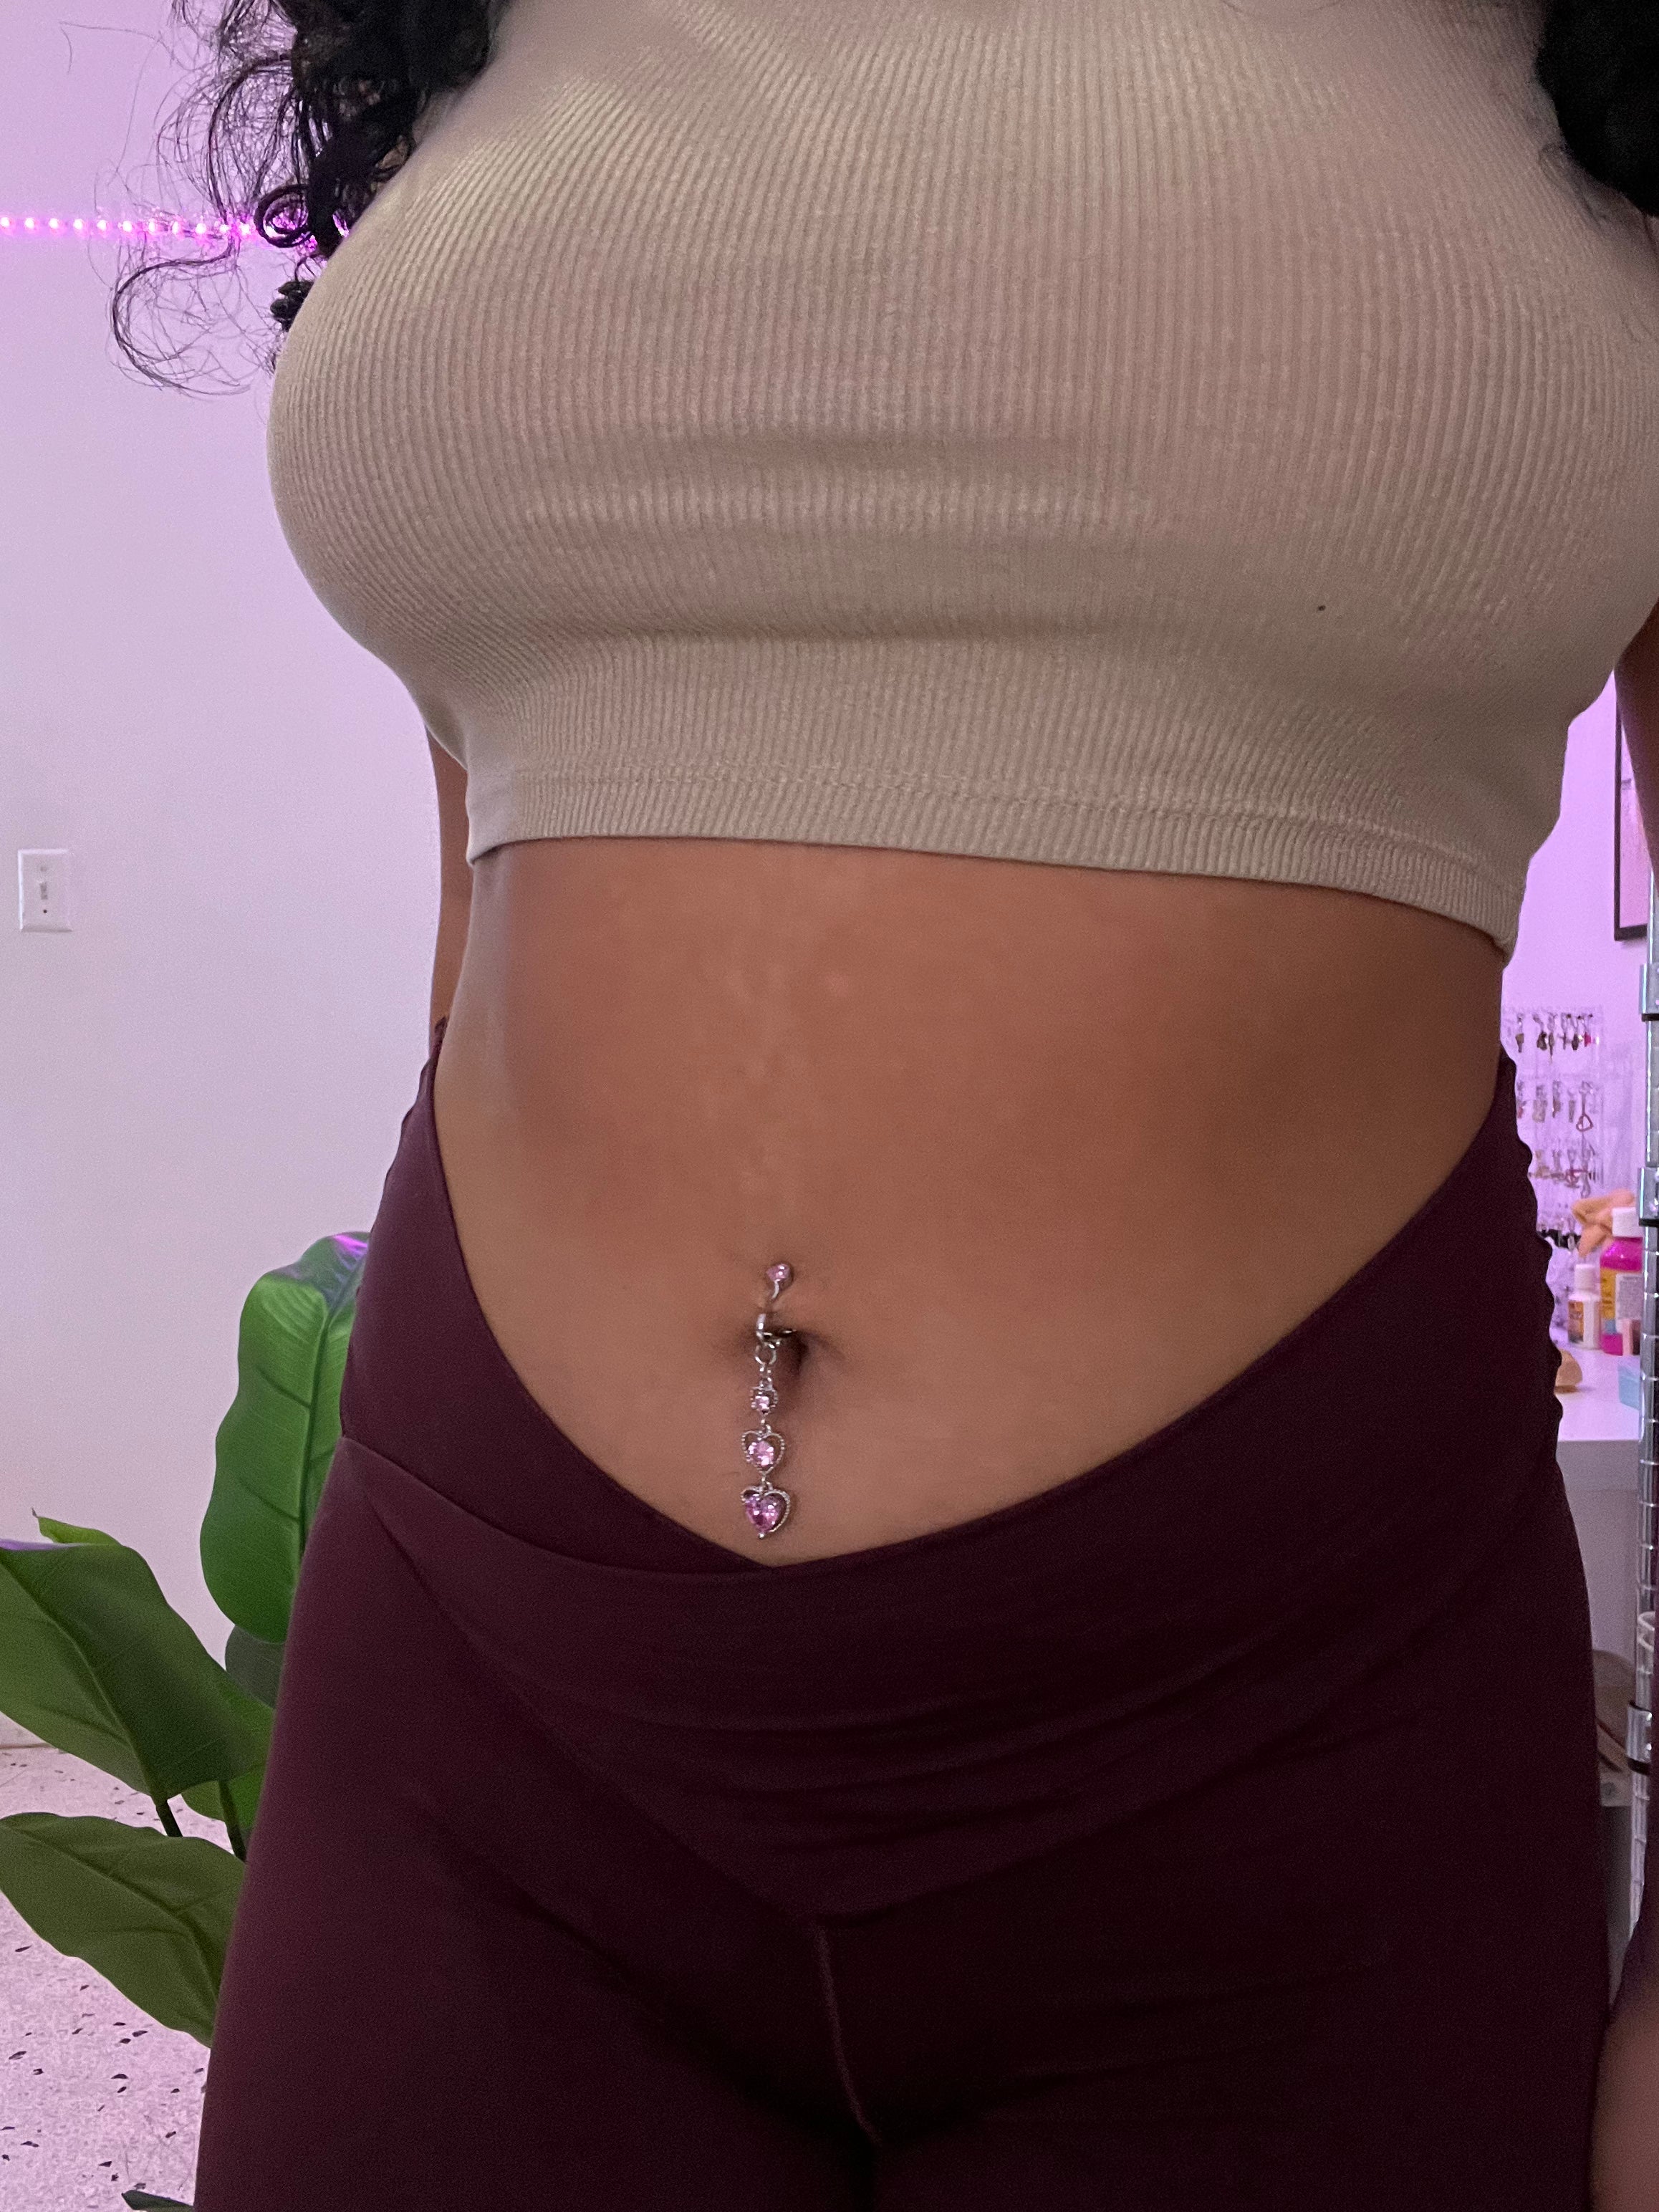 Kylie Clip On Belly Ring